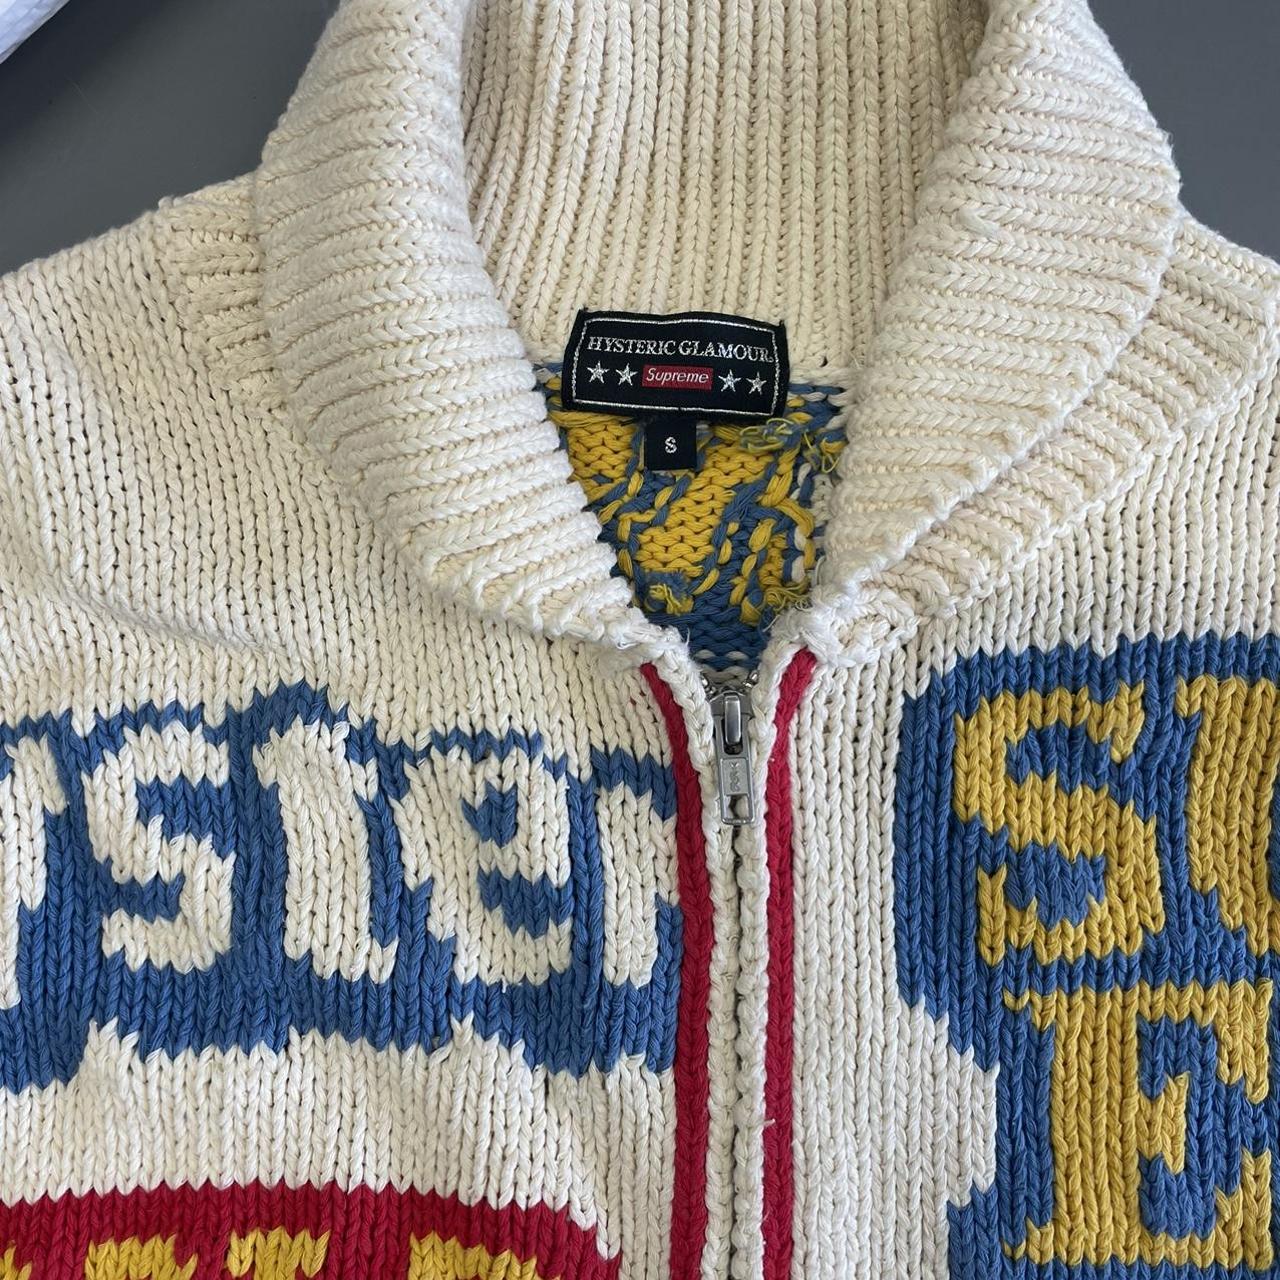 Supreme®/HYSTERIC GLAMOUR Logos Zip Up Sweater knit